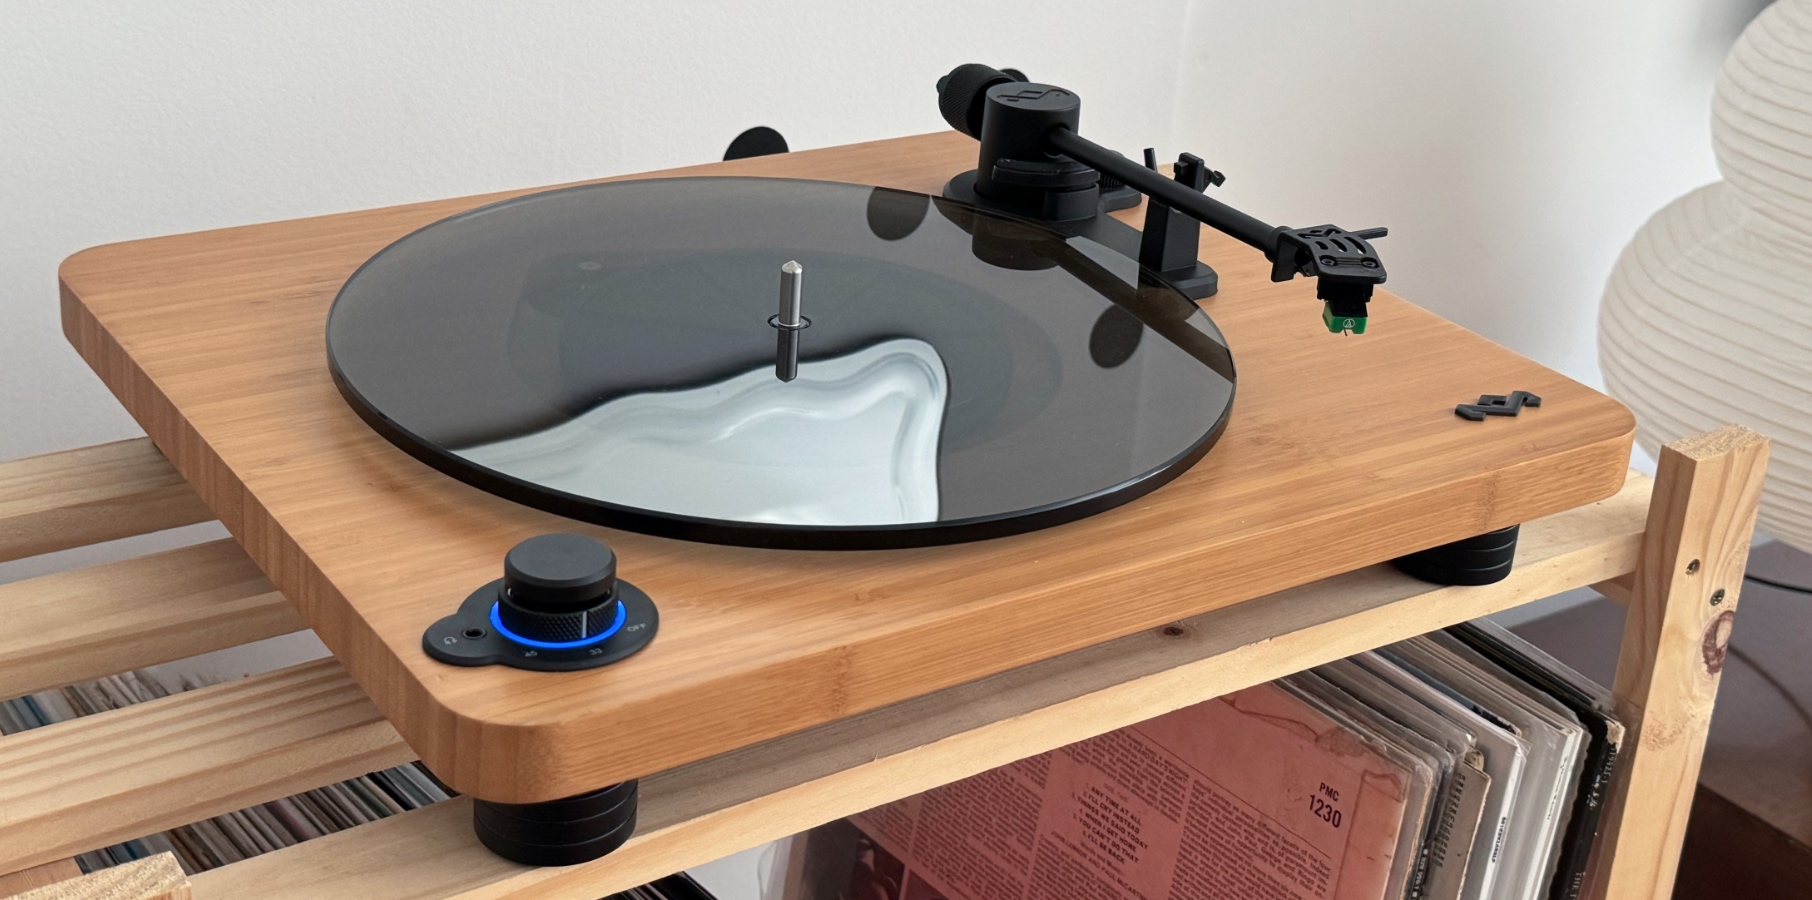 House of Marley  How To Set Up Your Stir It Up Wireless Turntable